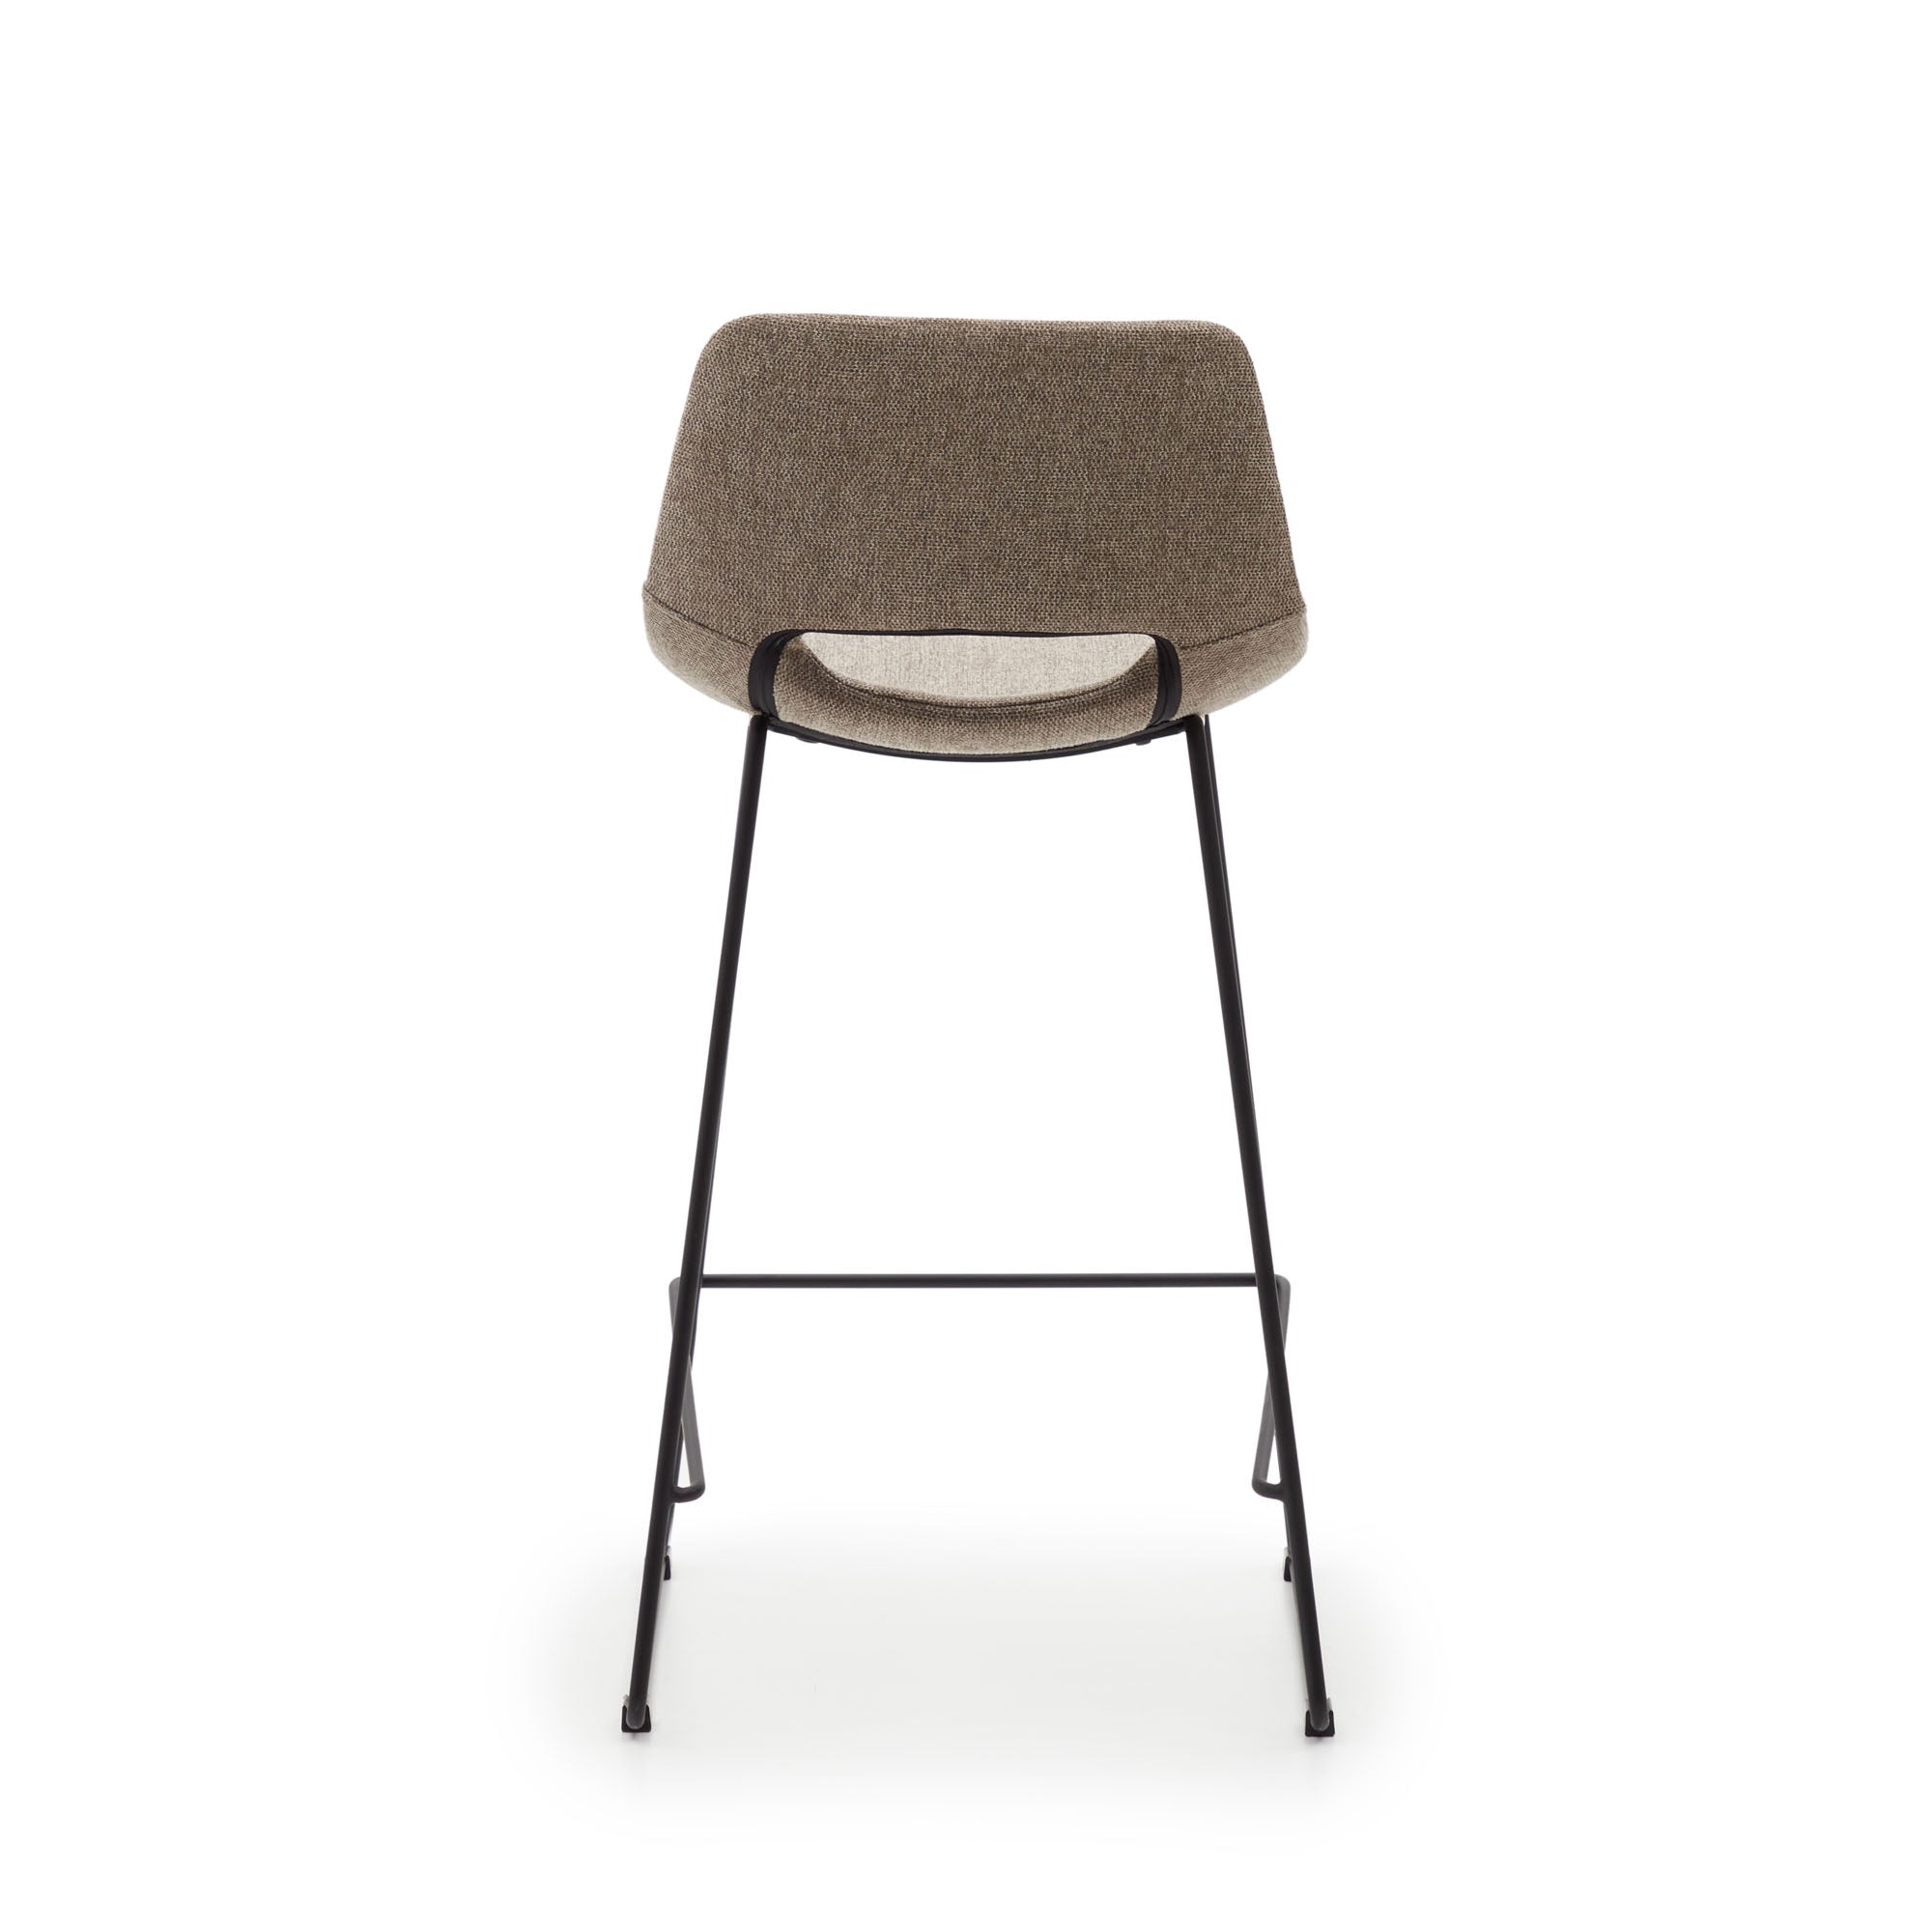 Zahara bar stool in brown with steel legs in black finish, height 65 cm